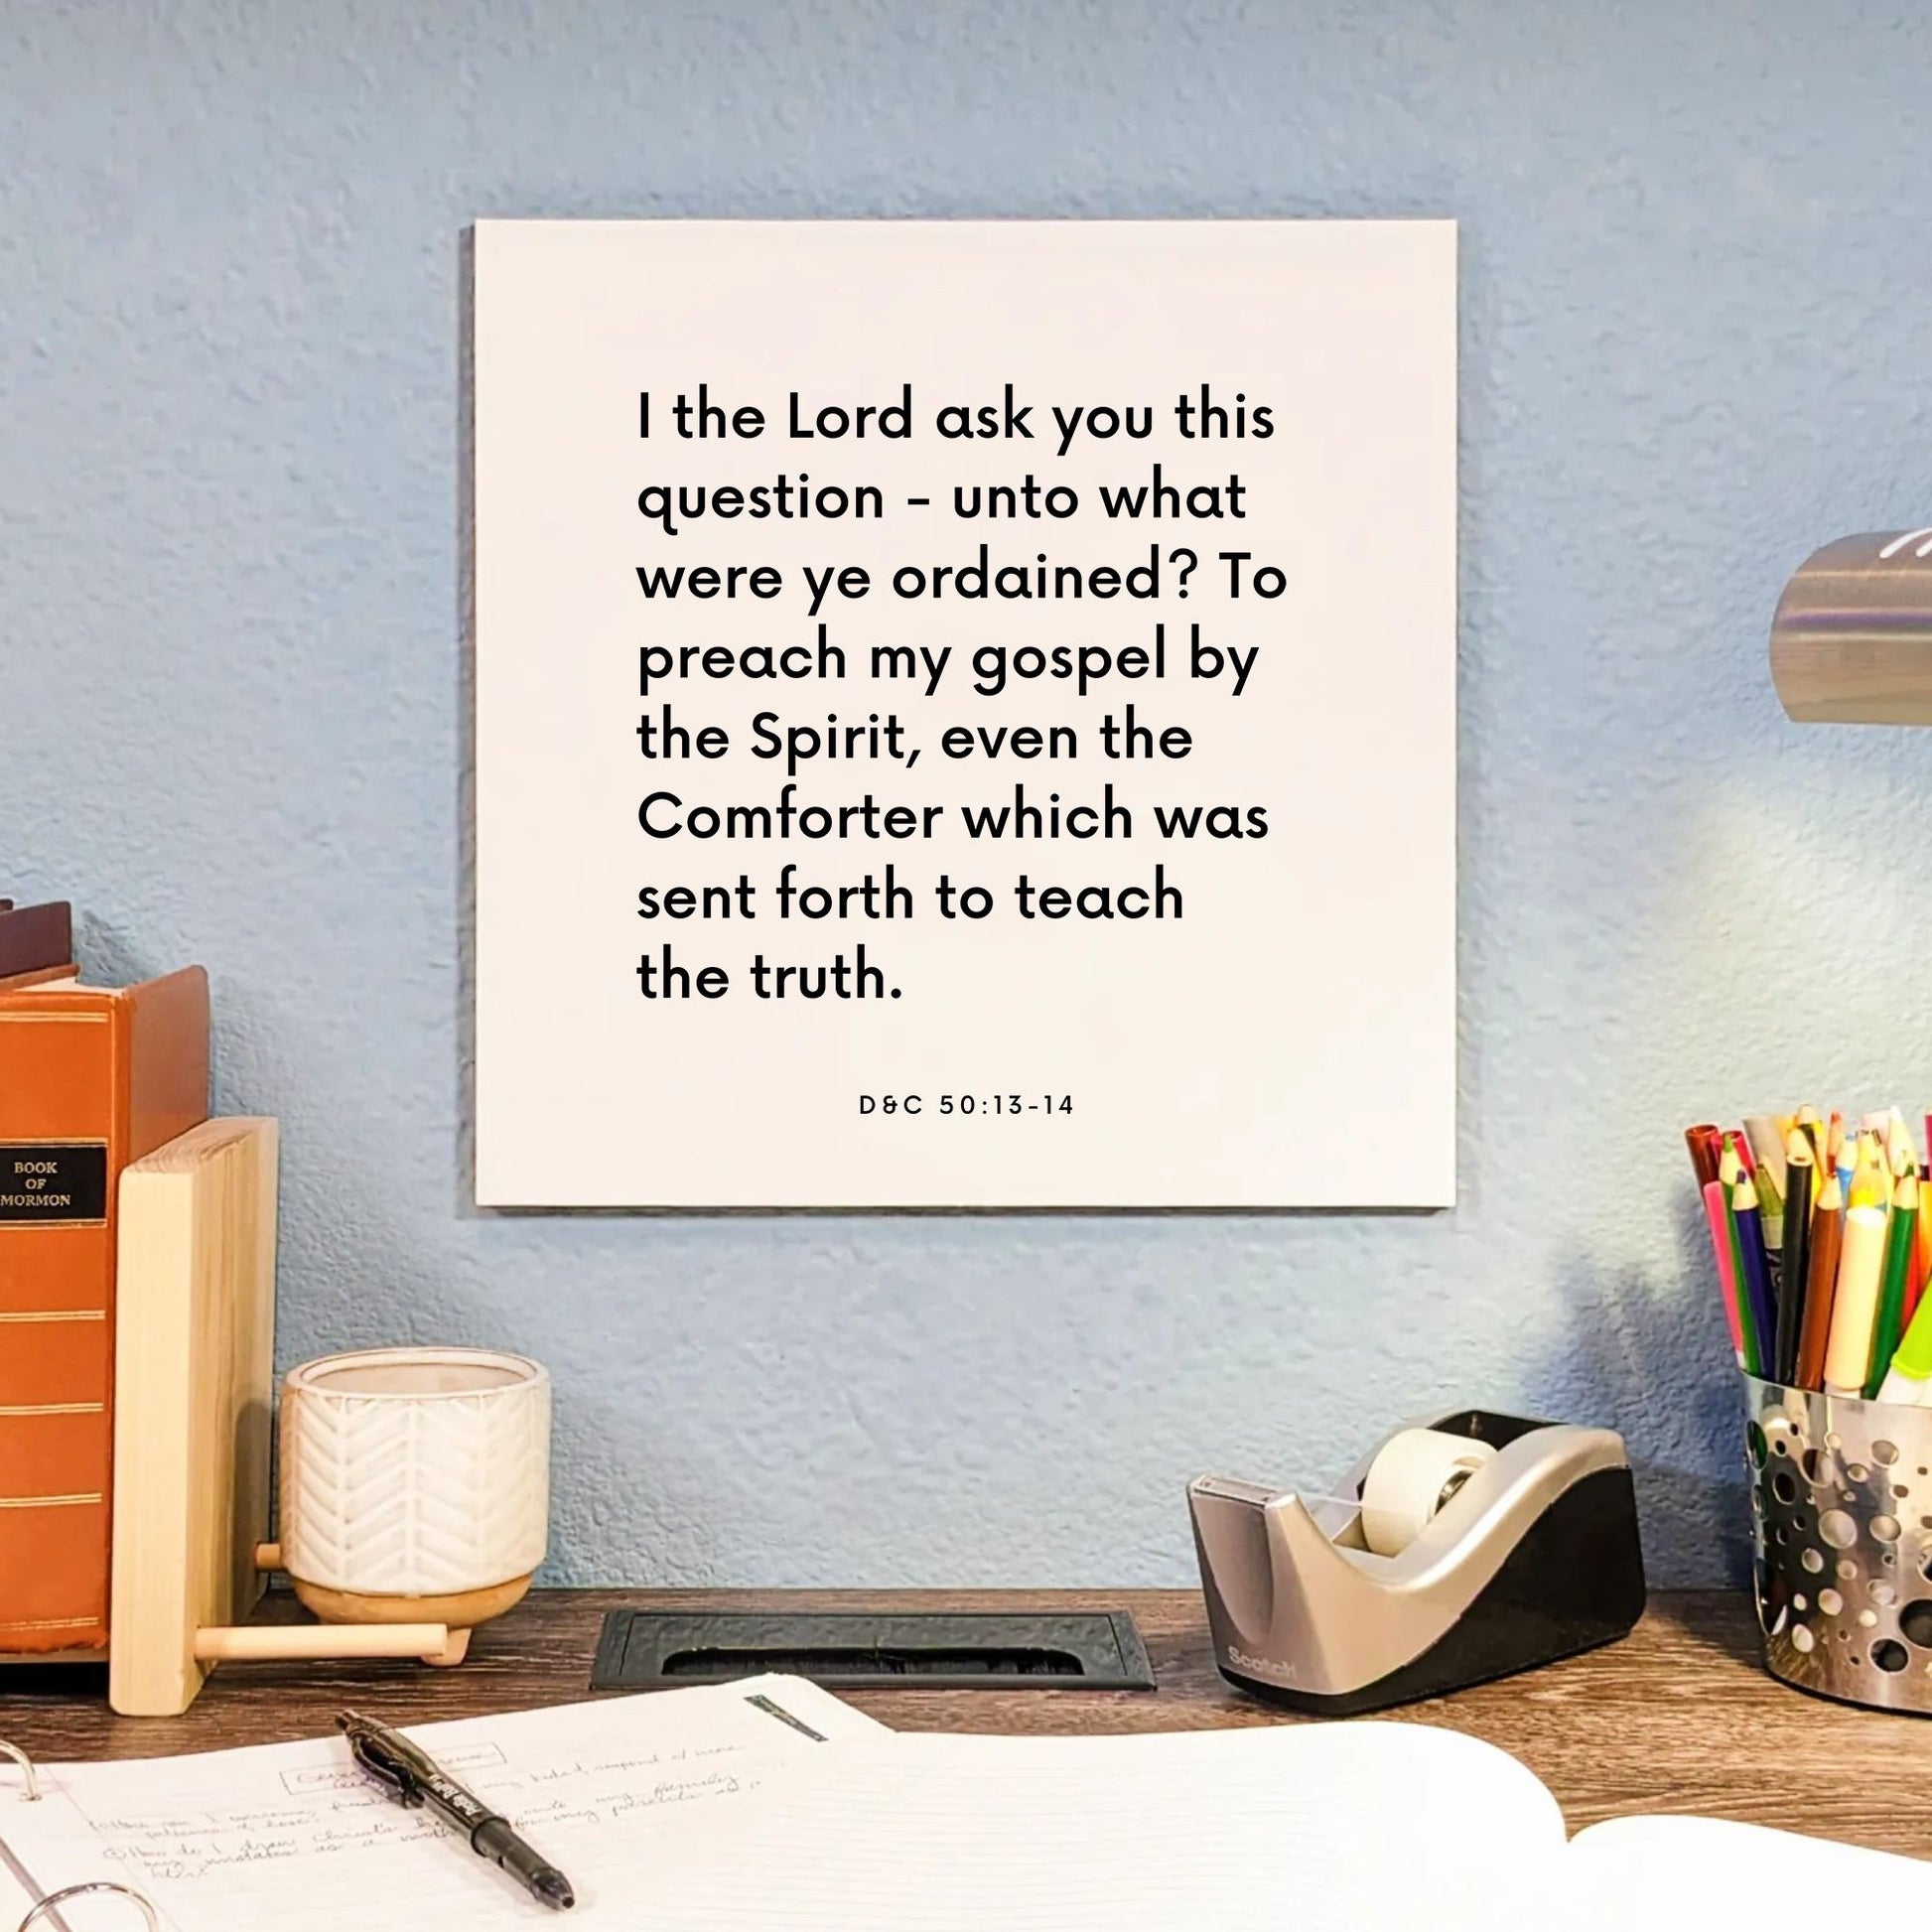 Desk mouting of the scripture tile for D&C 50:13-14 - "I the Lord ask you this question - unto what were ye ordained?"